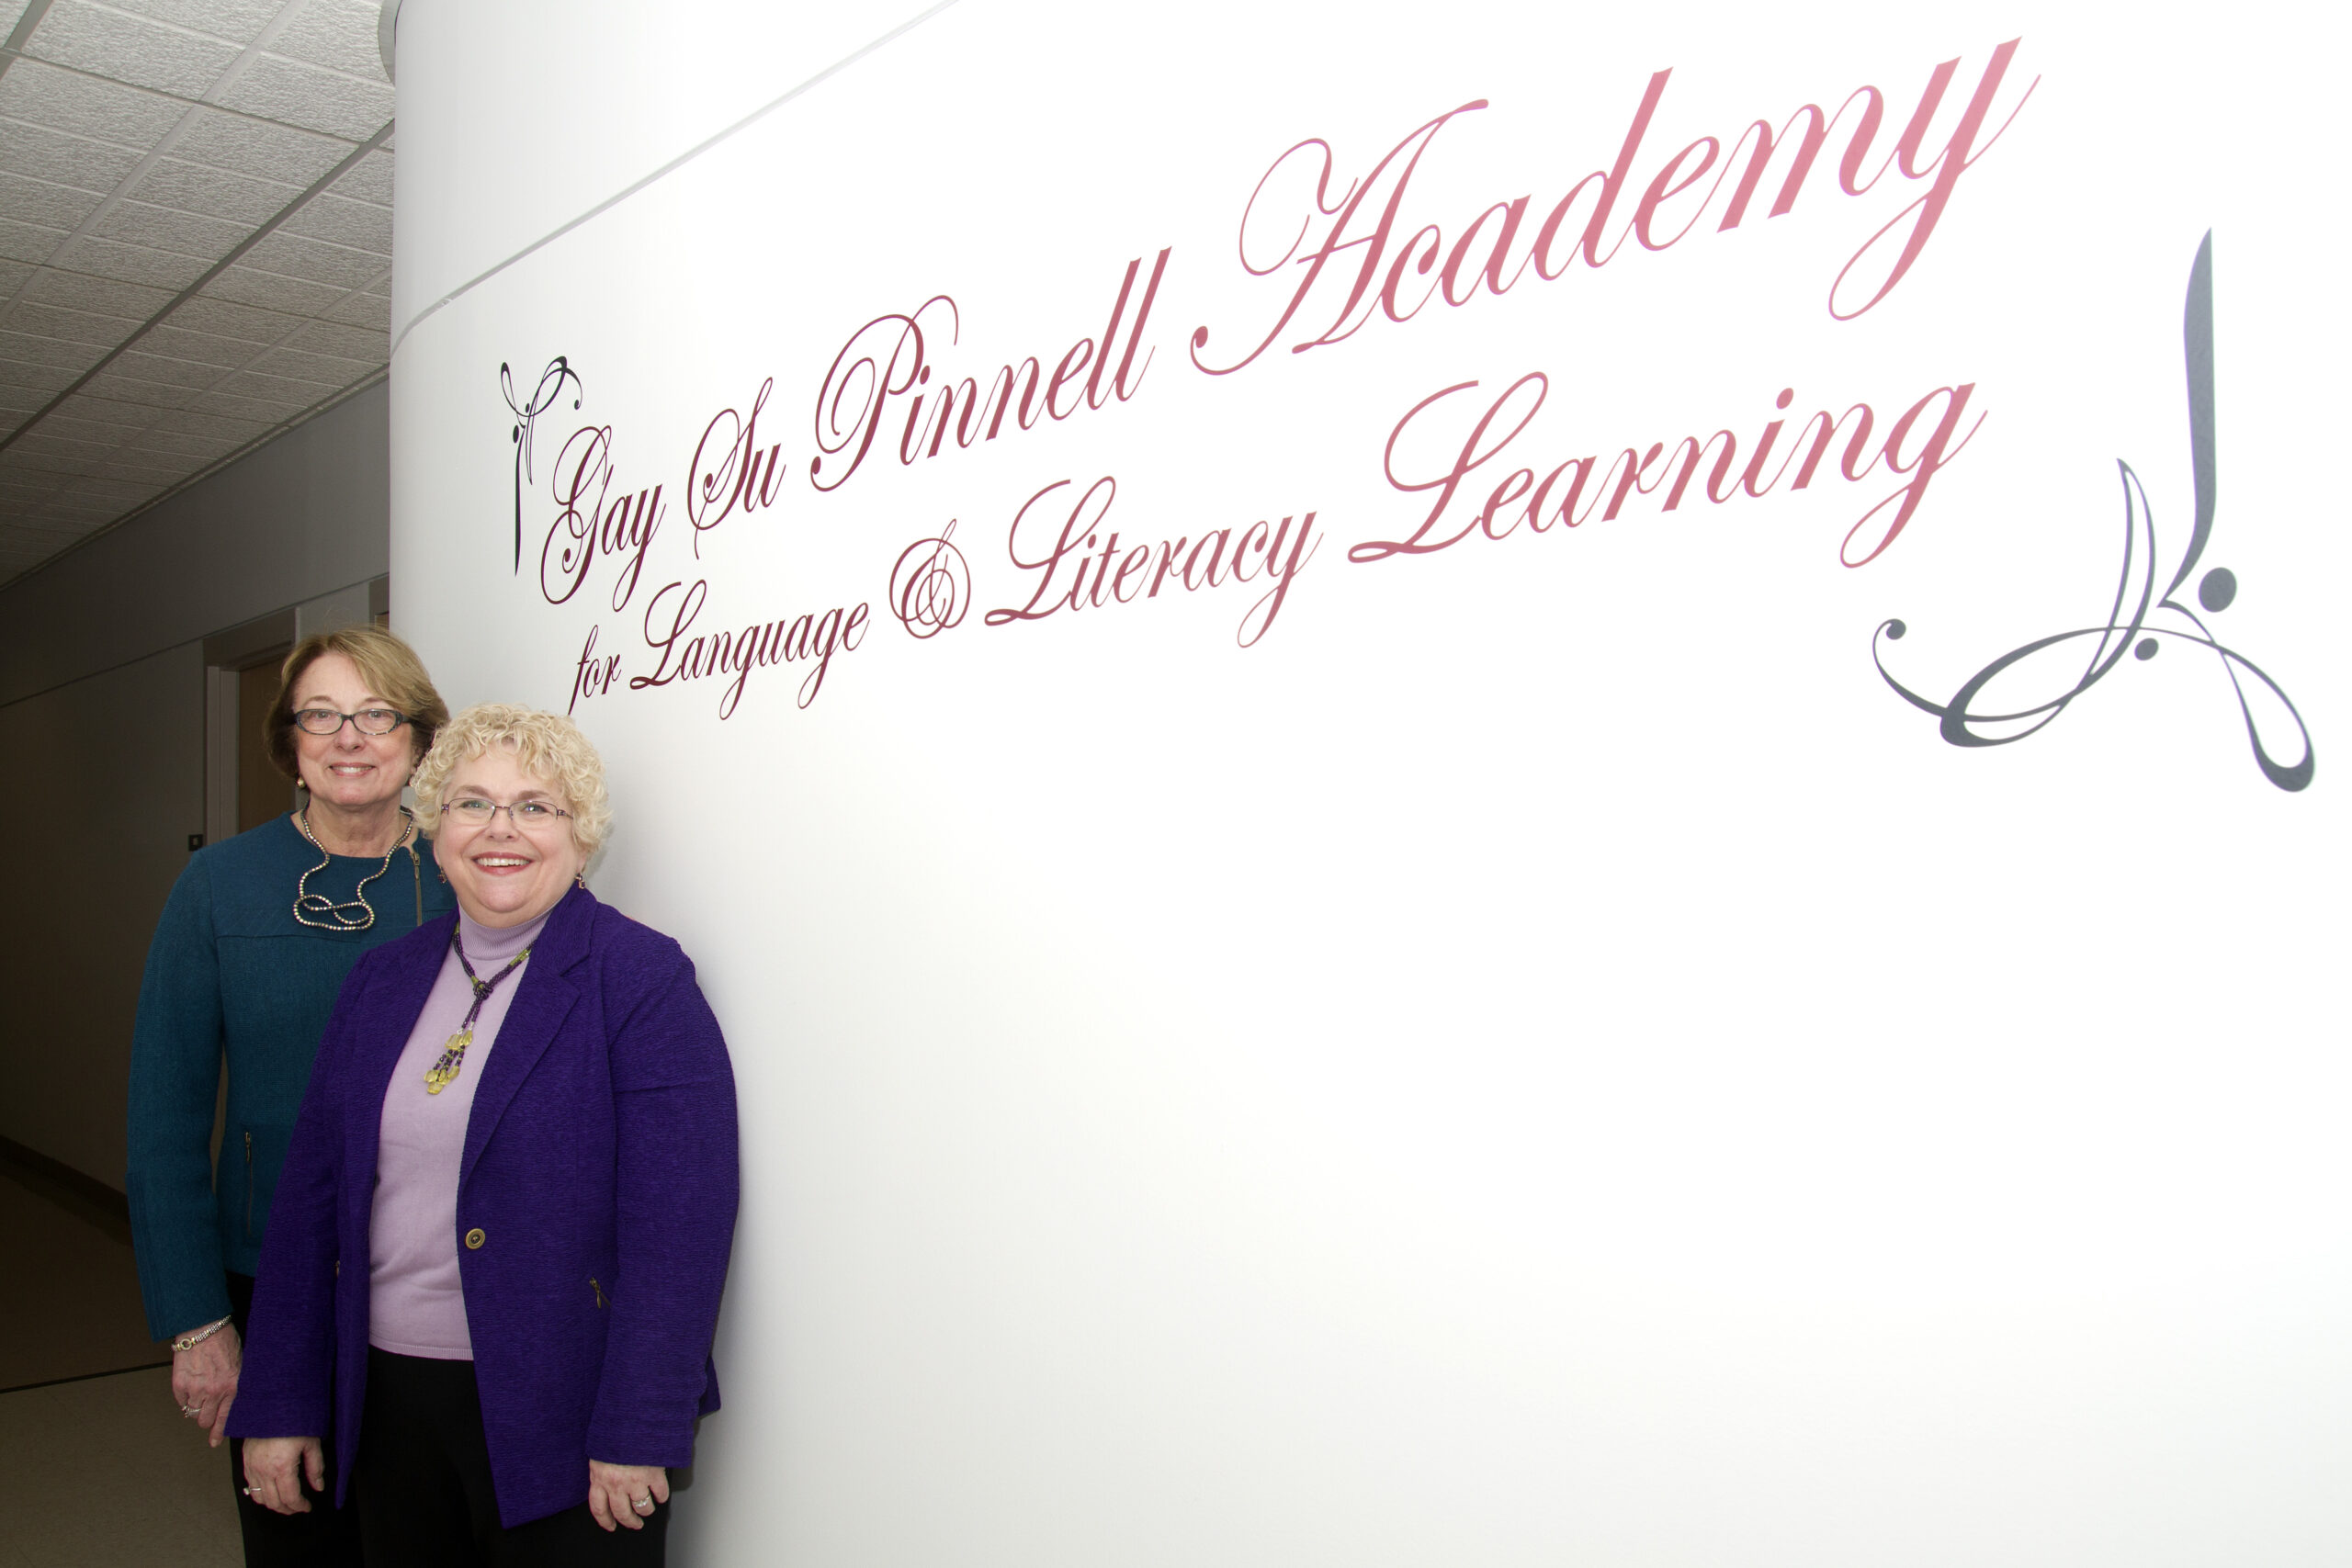 Two women stand near a wall with writing that says "Gay Su Pinnell Academy for Language and Literacy Learning"